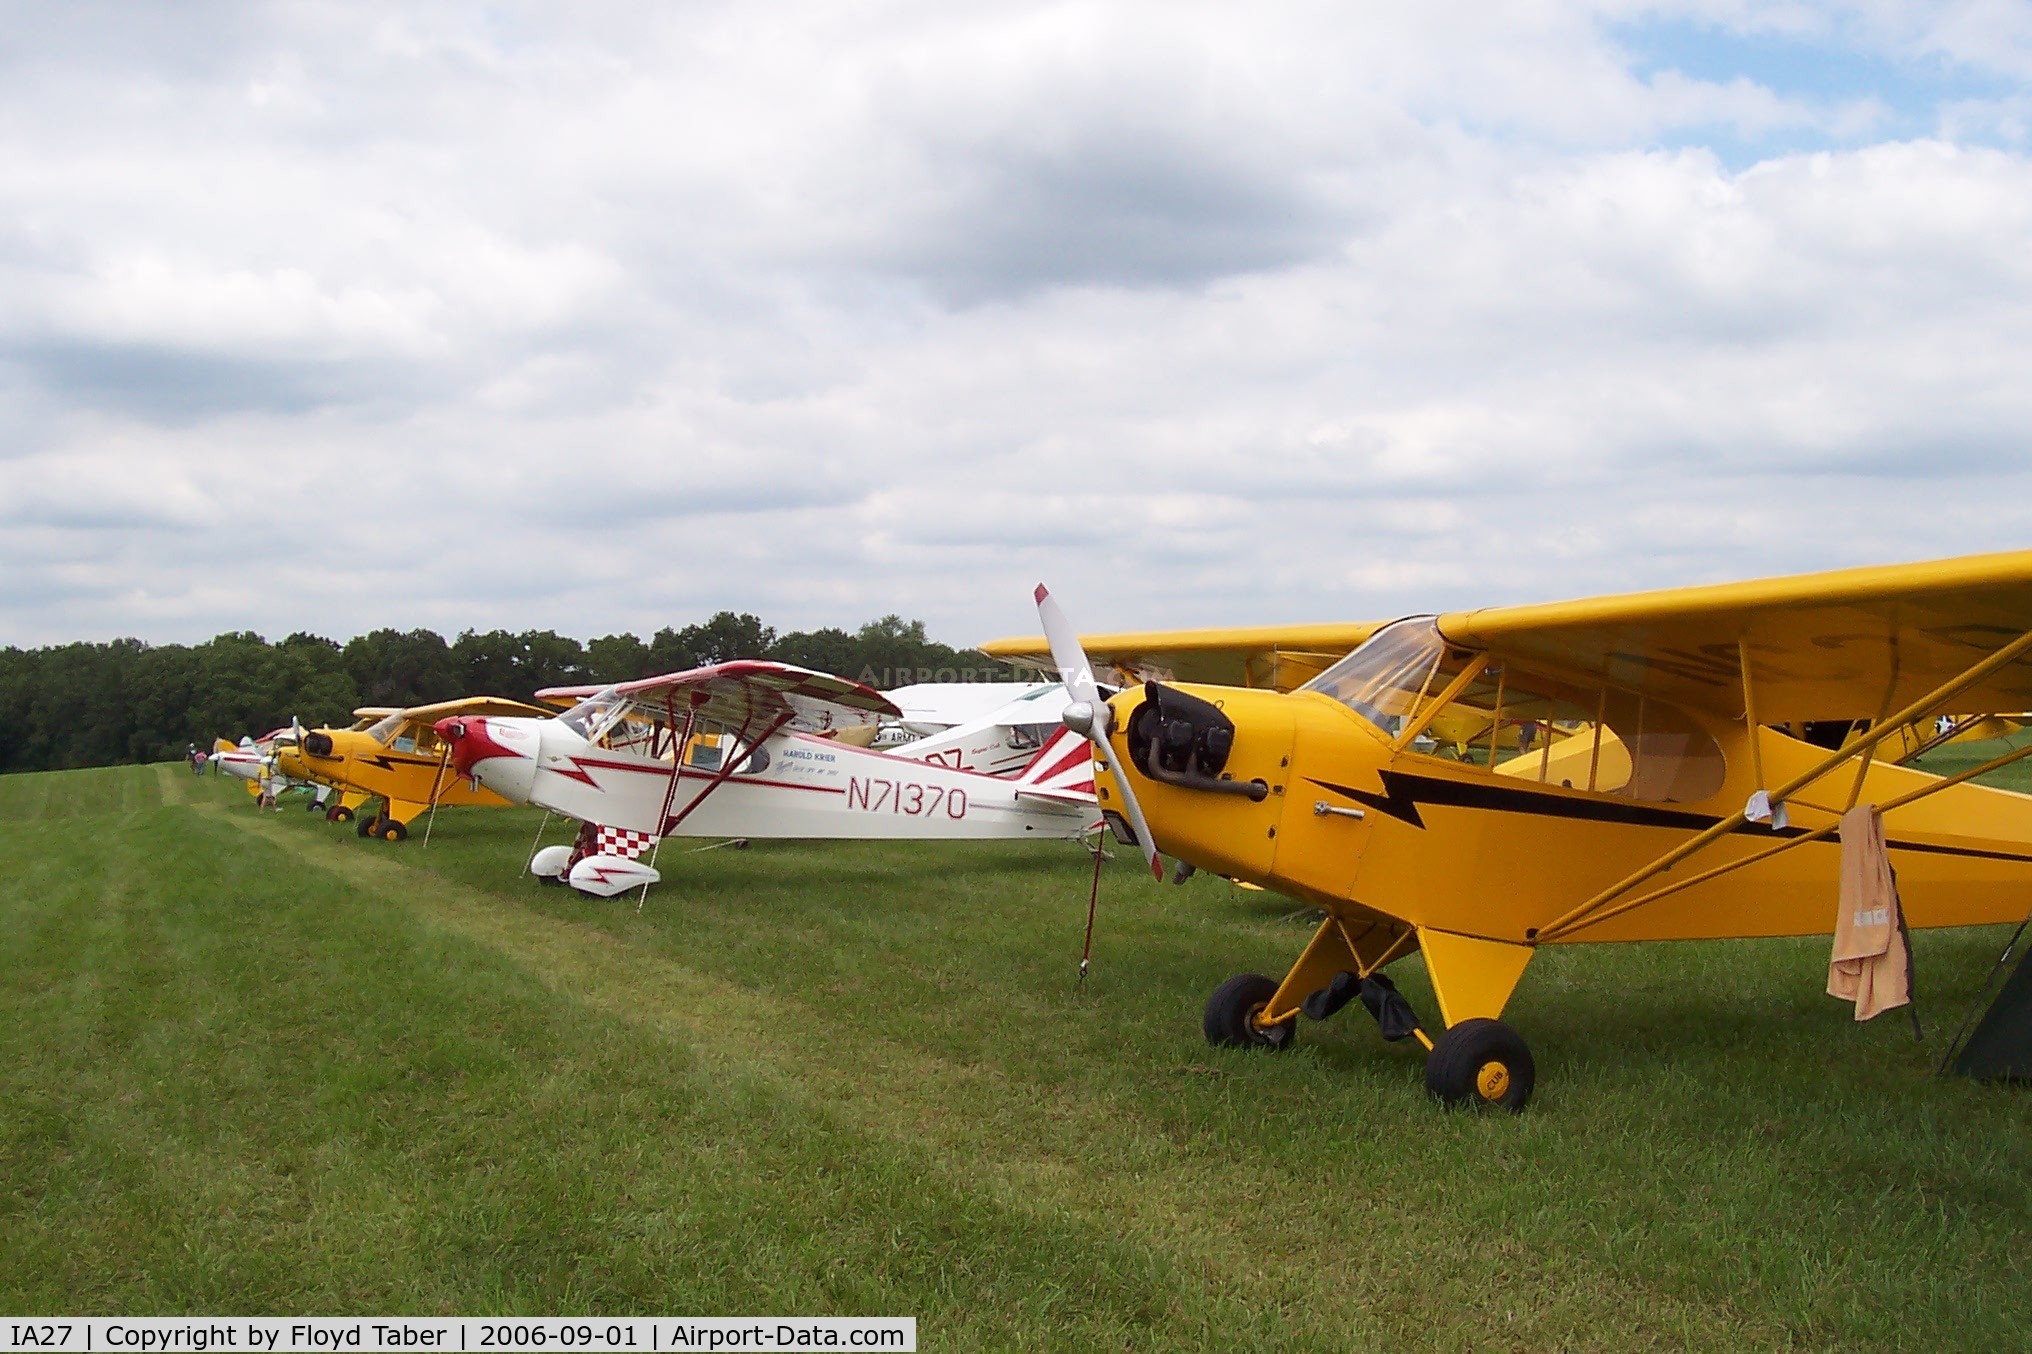 Antique Airfield Airport (IA27) - More of the Flight Line and Campers at Antique Field Fly In